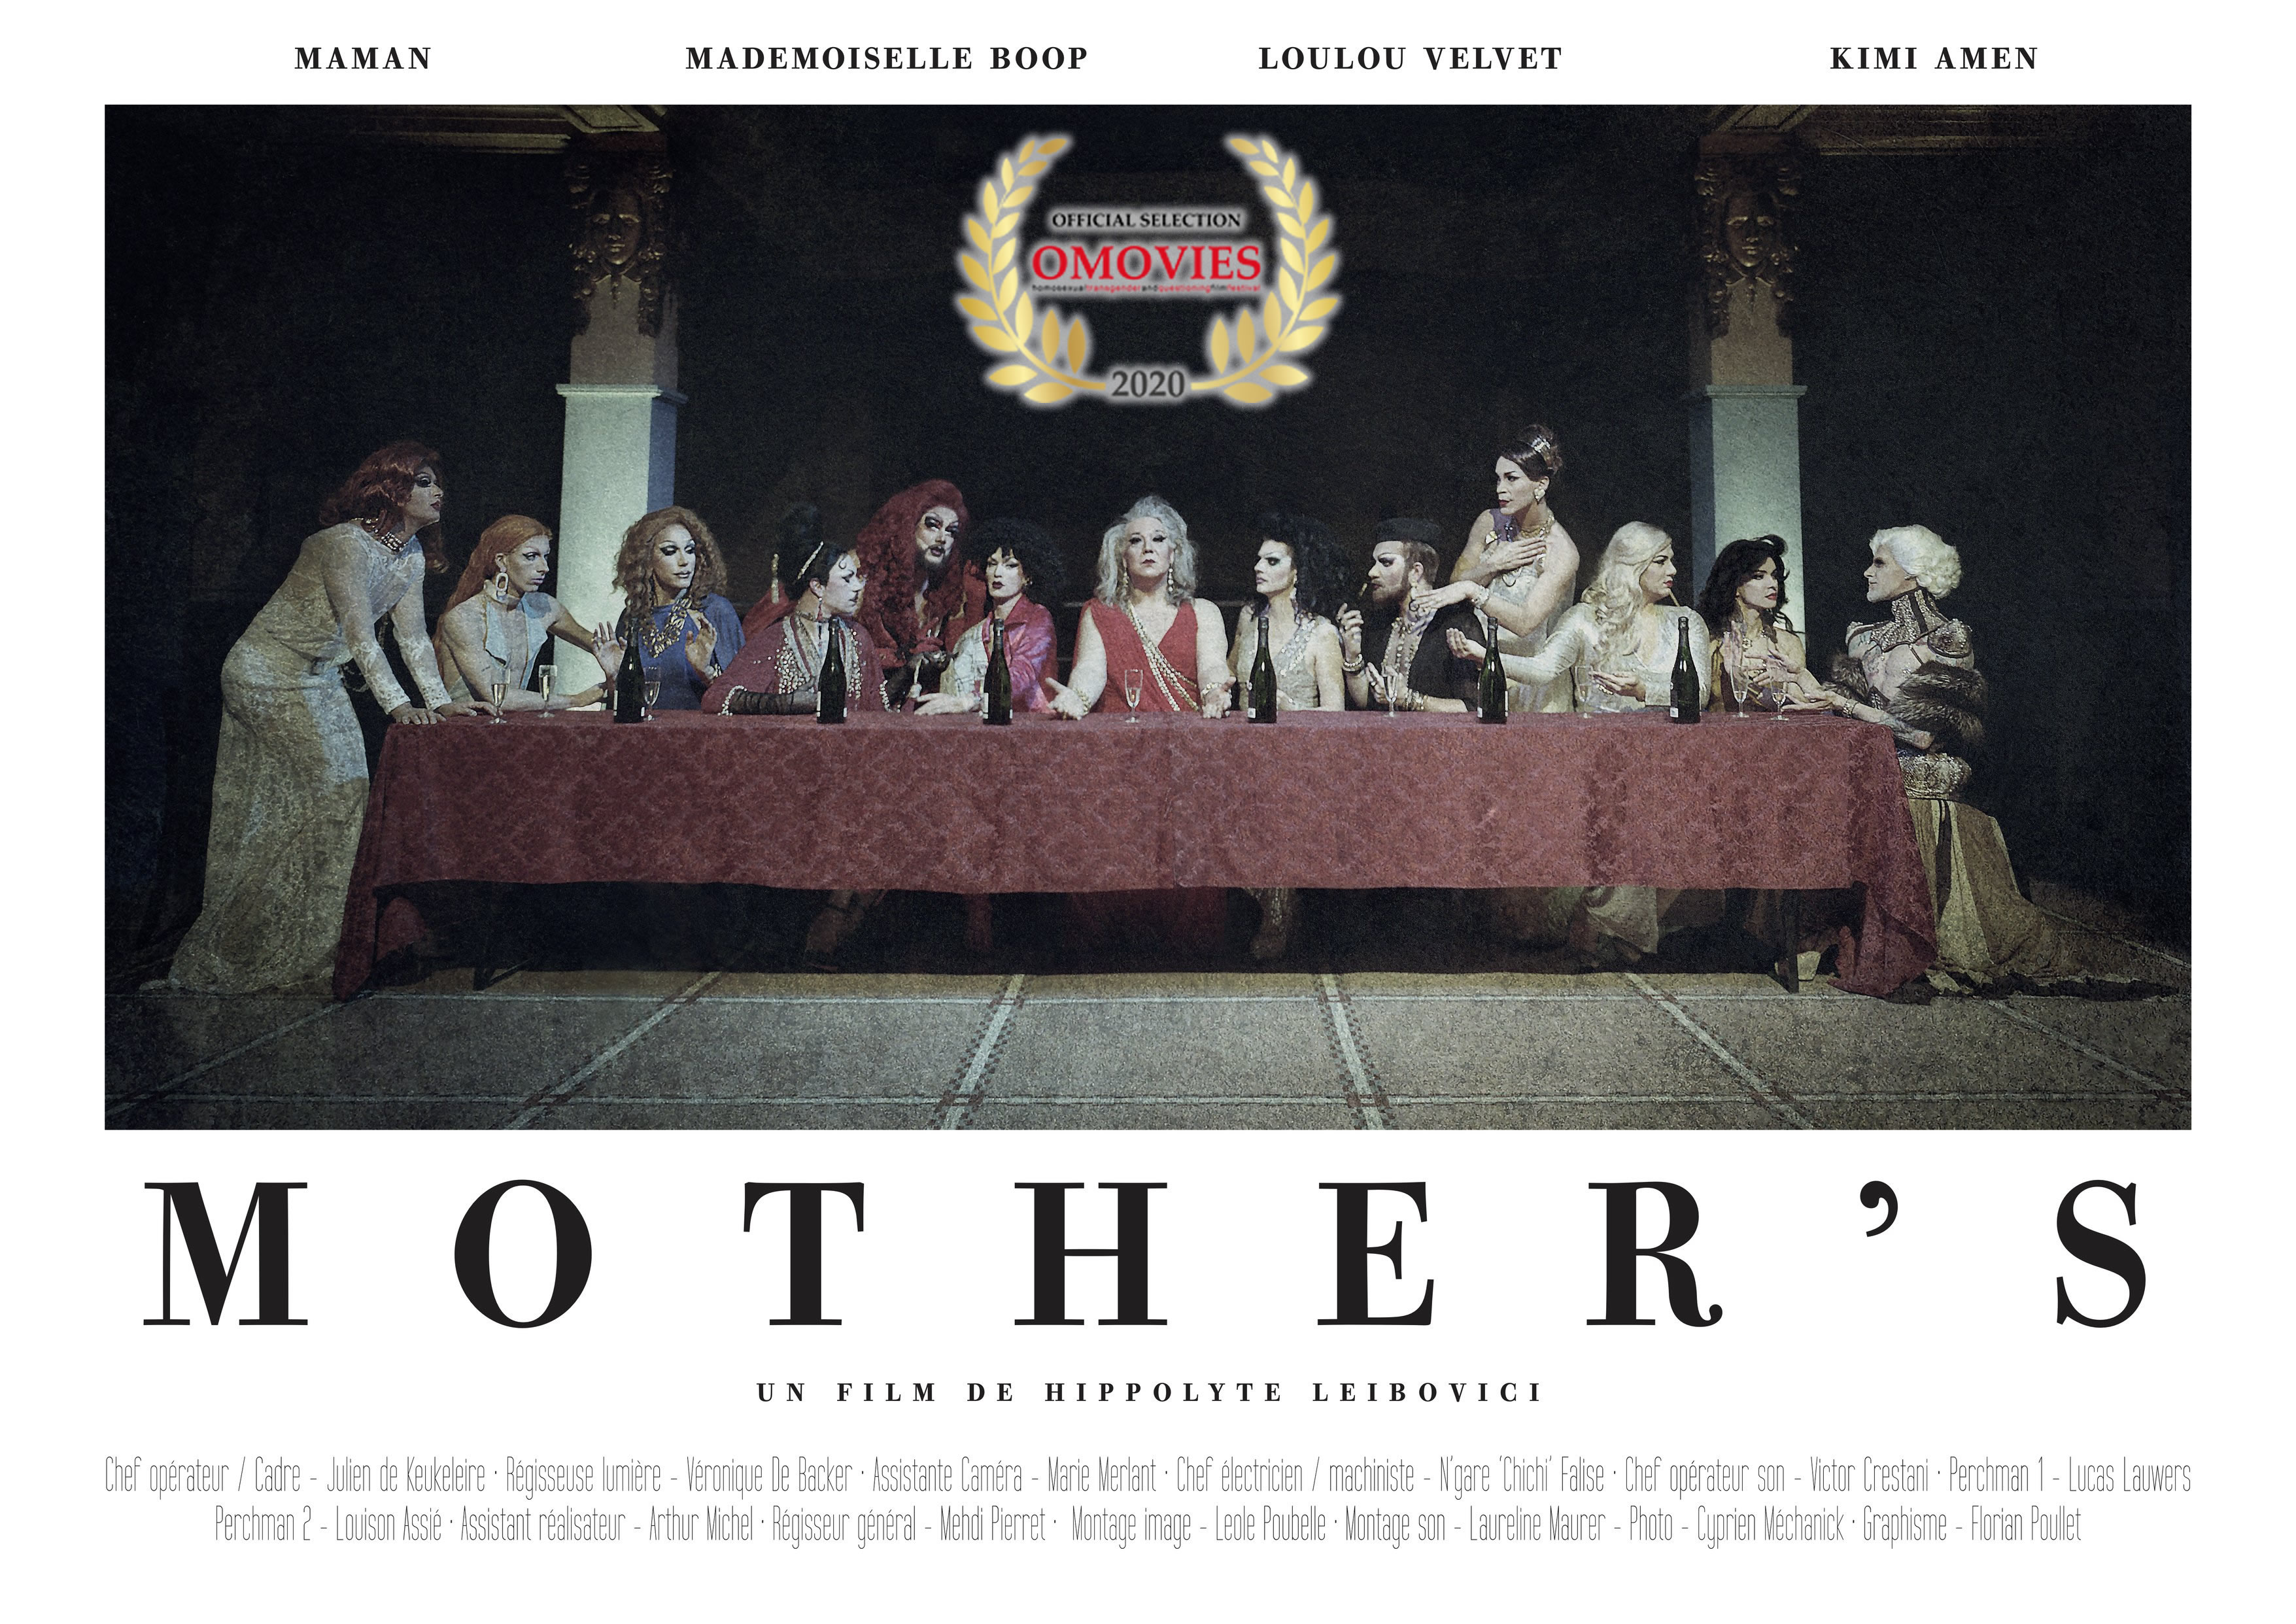 Mother’s – Director Hippolyte Leibovici Dec 19